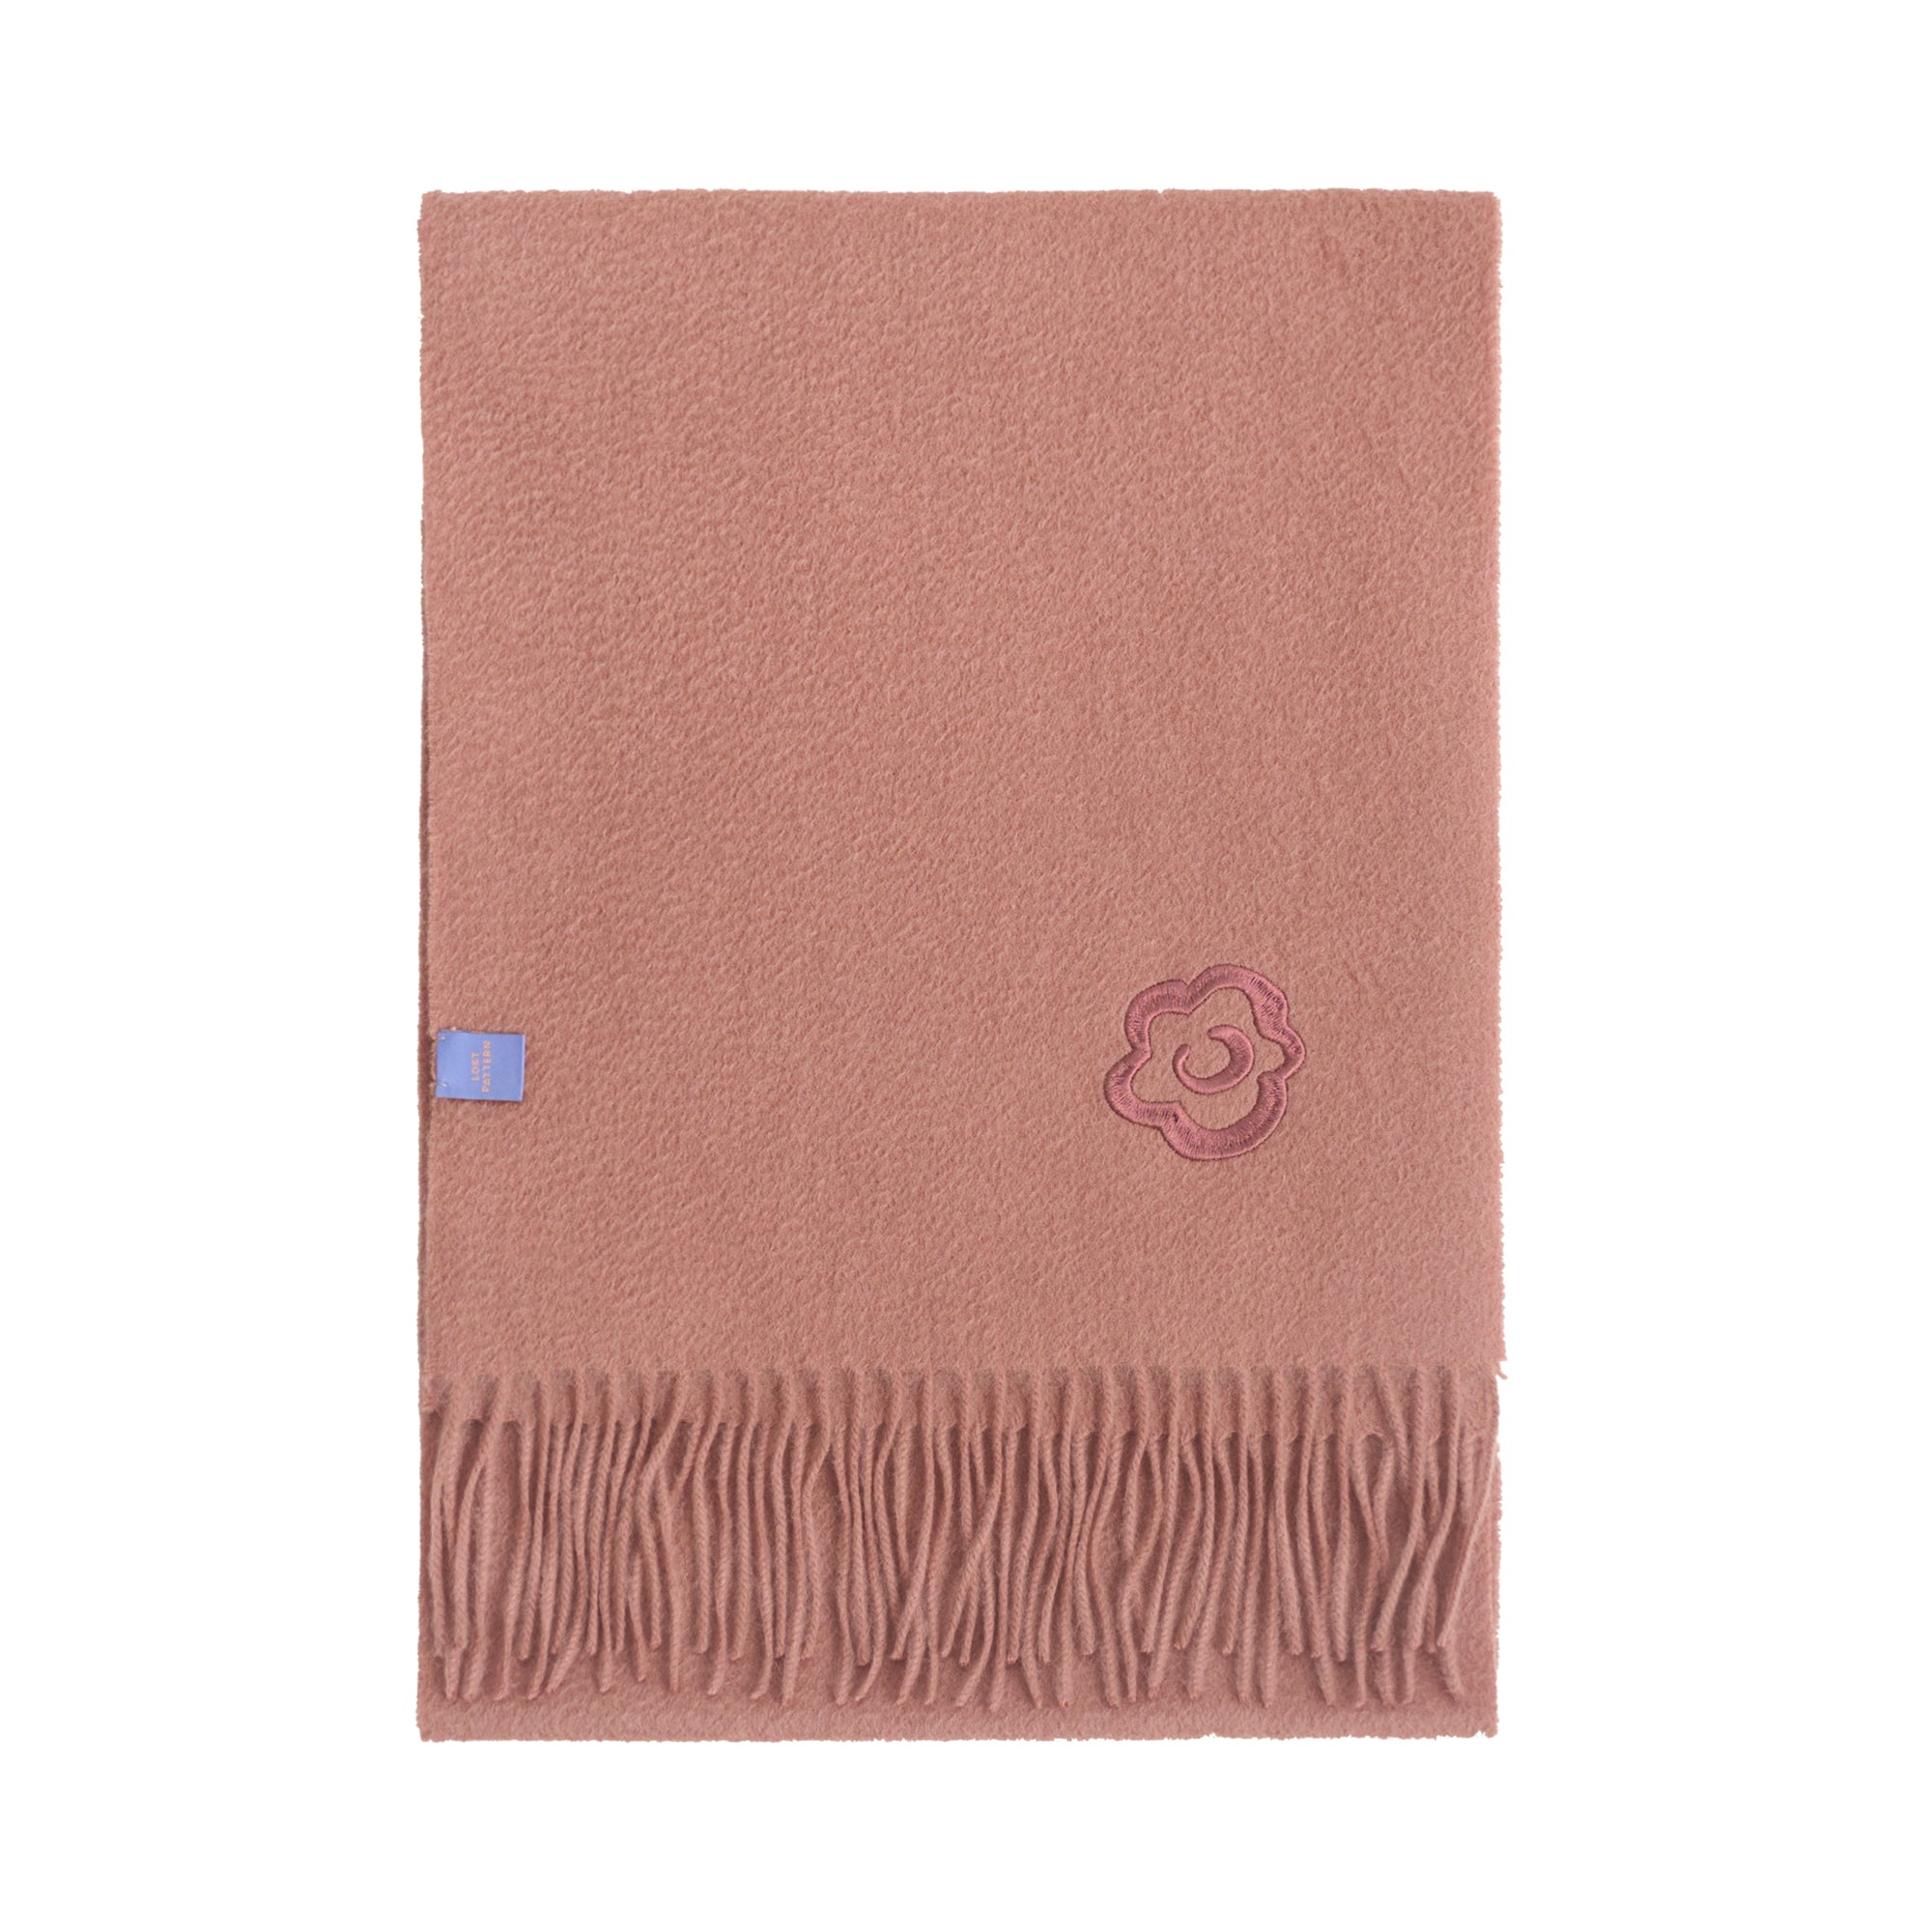 "Lost in Warmth" Classic Cashmere Scarf - Dusty Rose